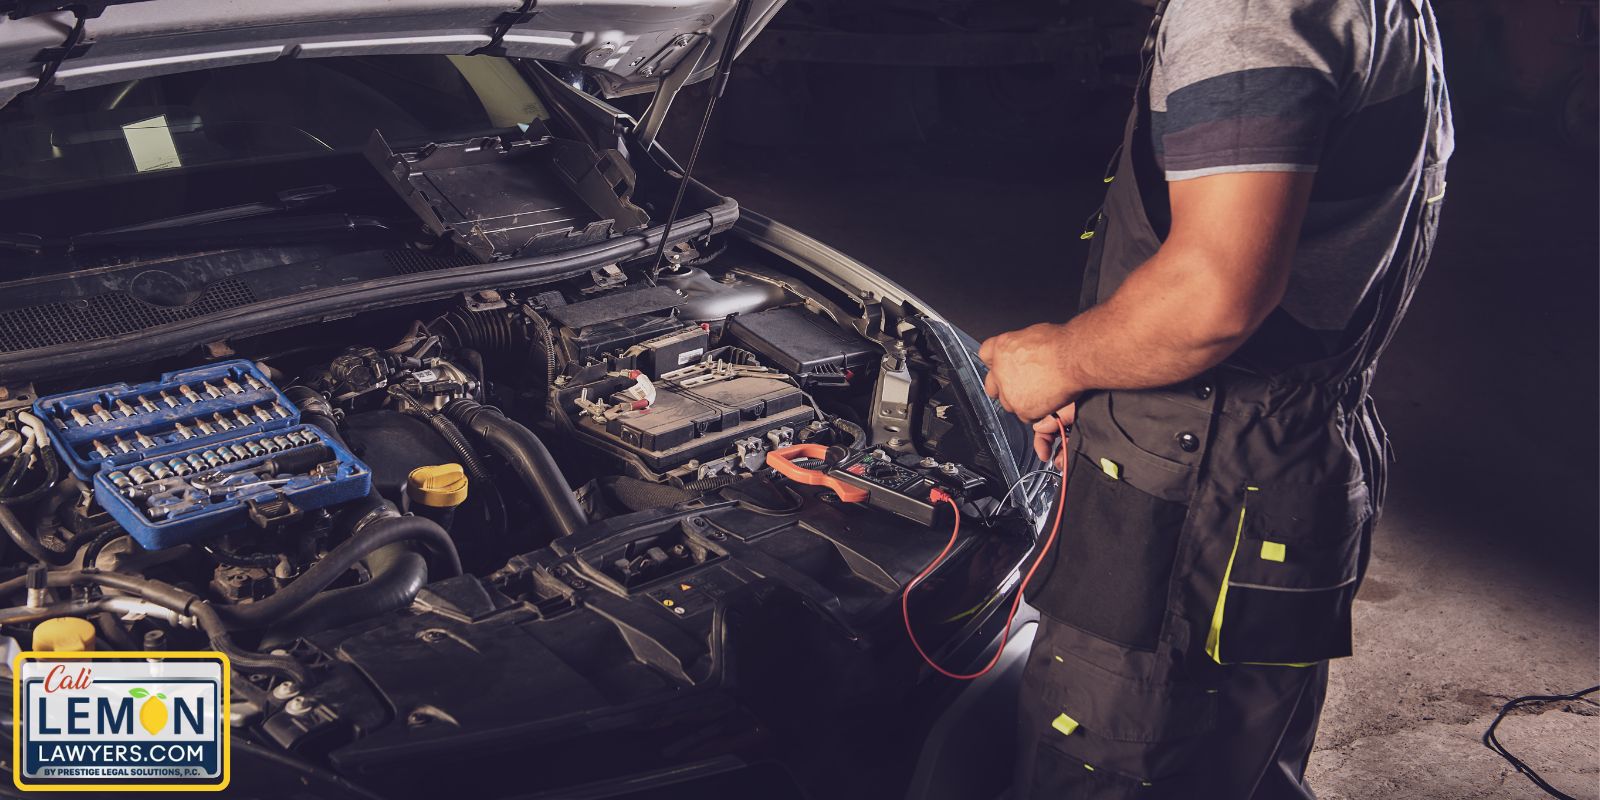 Why Should You Get Your Car Serviced?